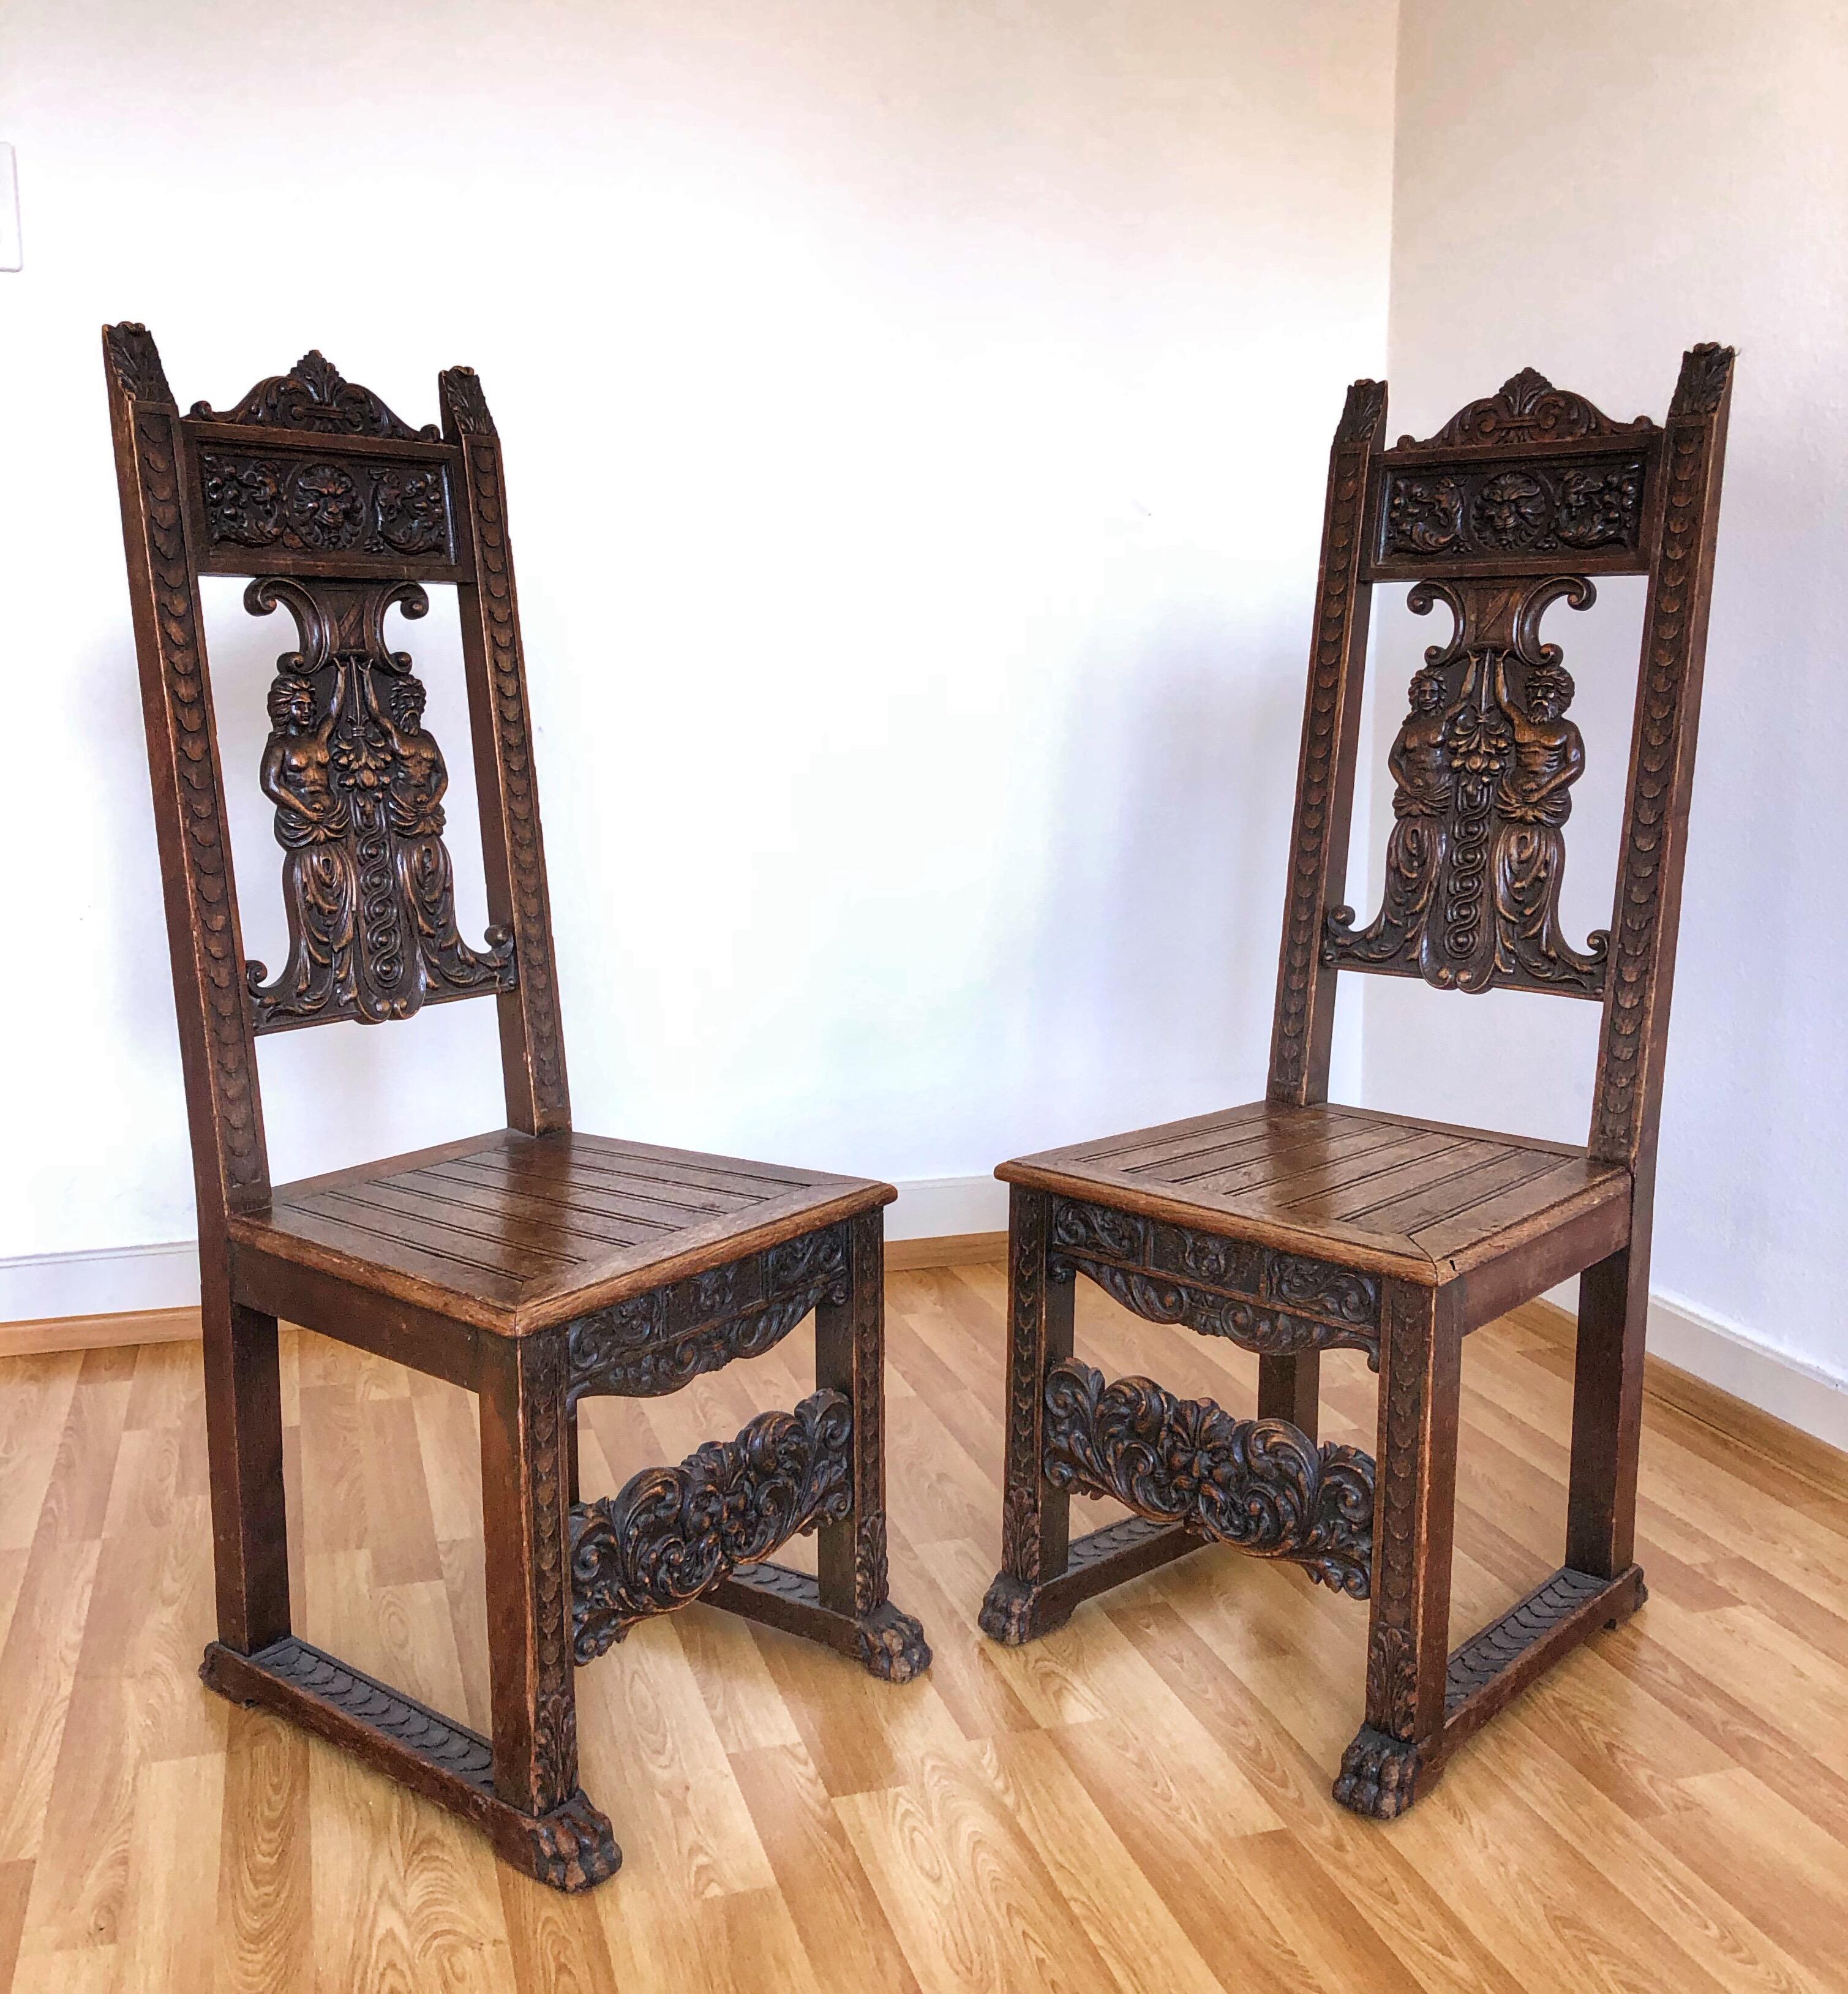 Beautiful rustic pair of Italian / Switzerland carved chairs
A man and a women 
Lion legs 
Measures: H 115 cm x W 43 cm x D 38 cm.